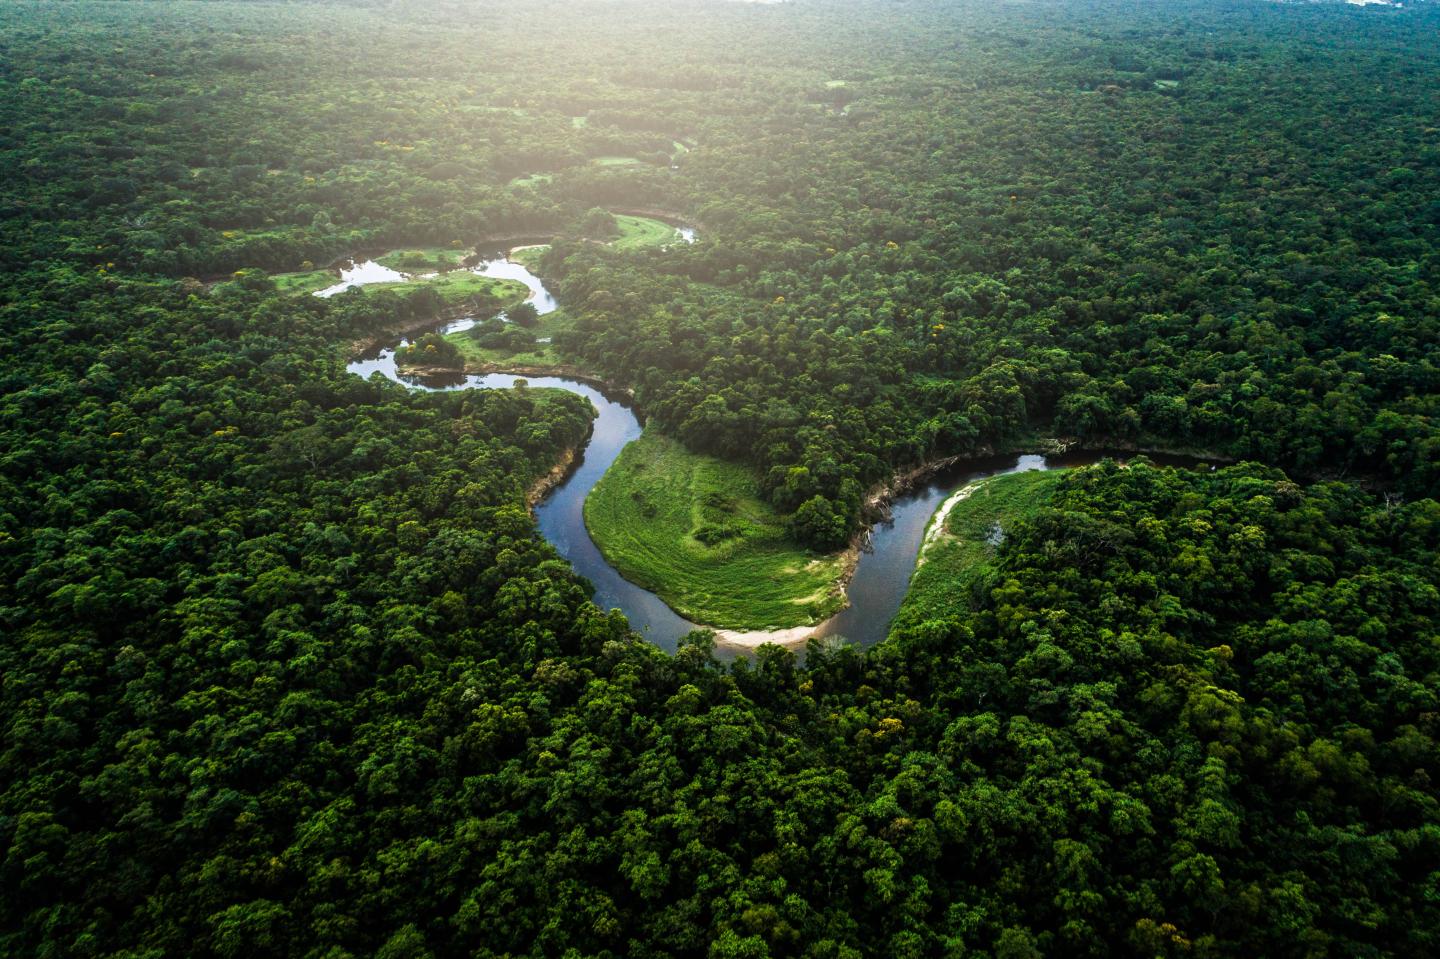 A river curving an winding through a dense forest from above